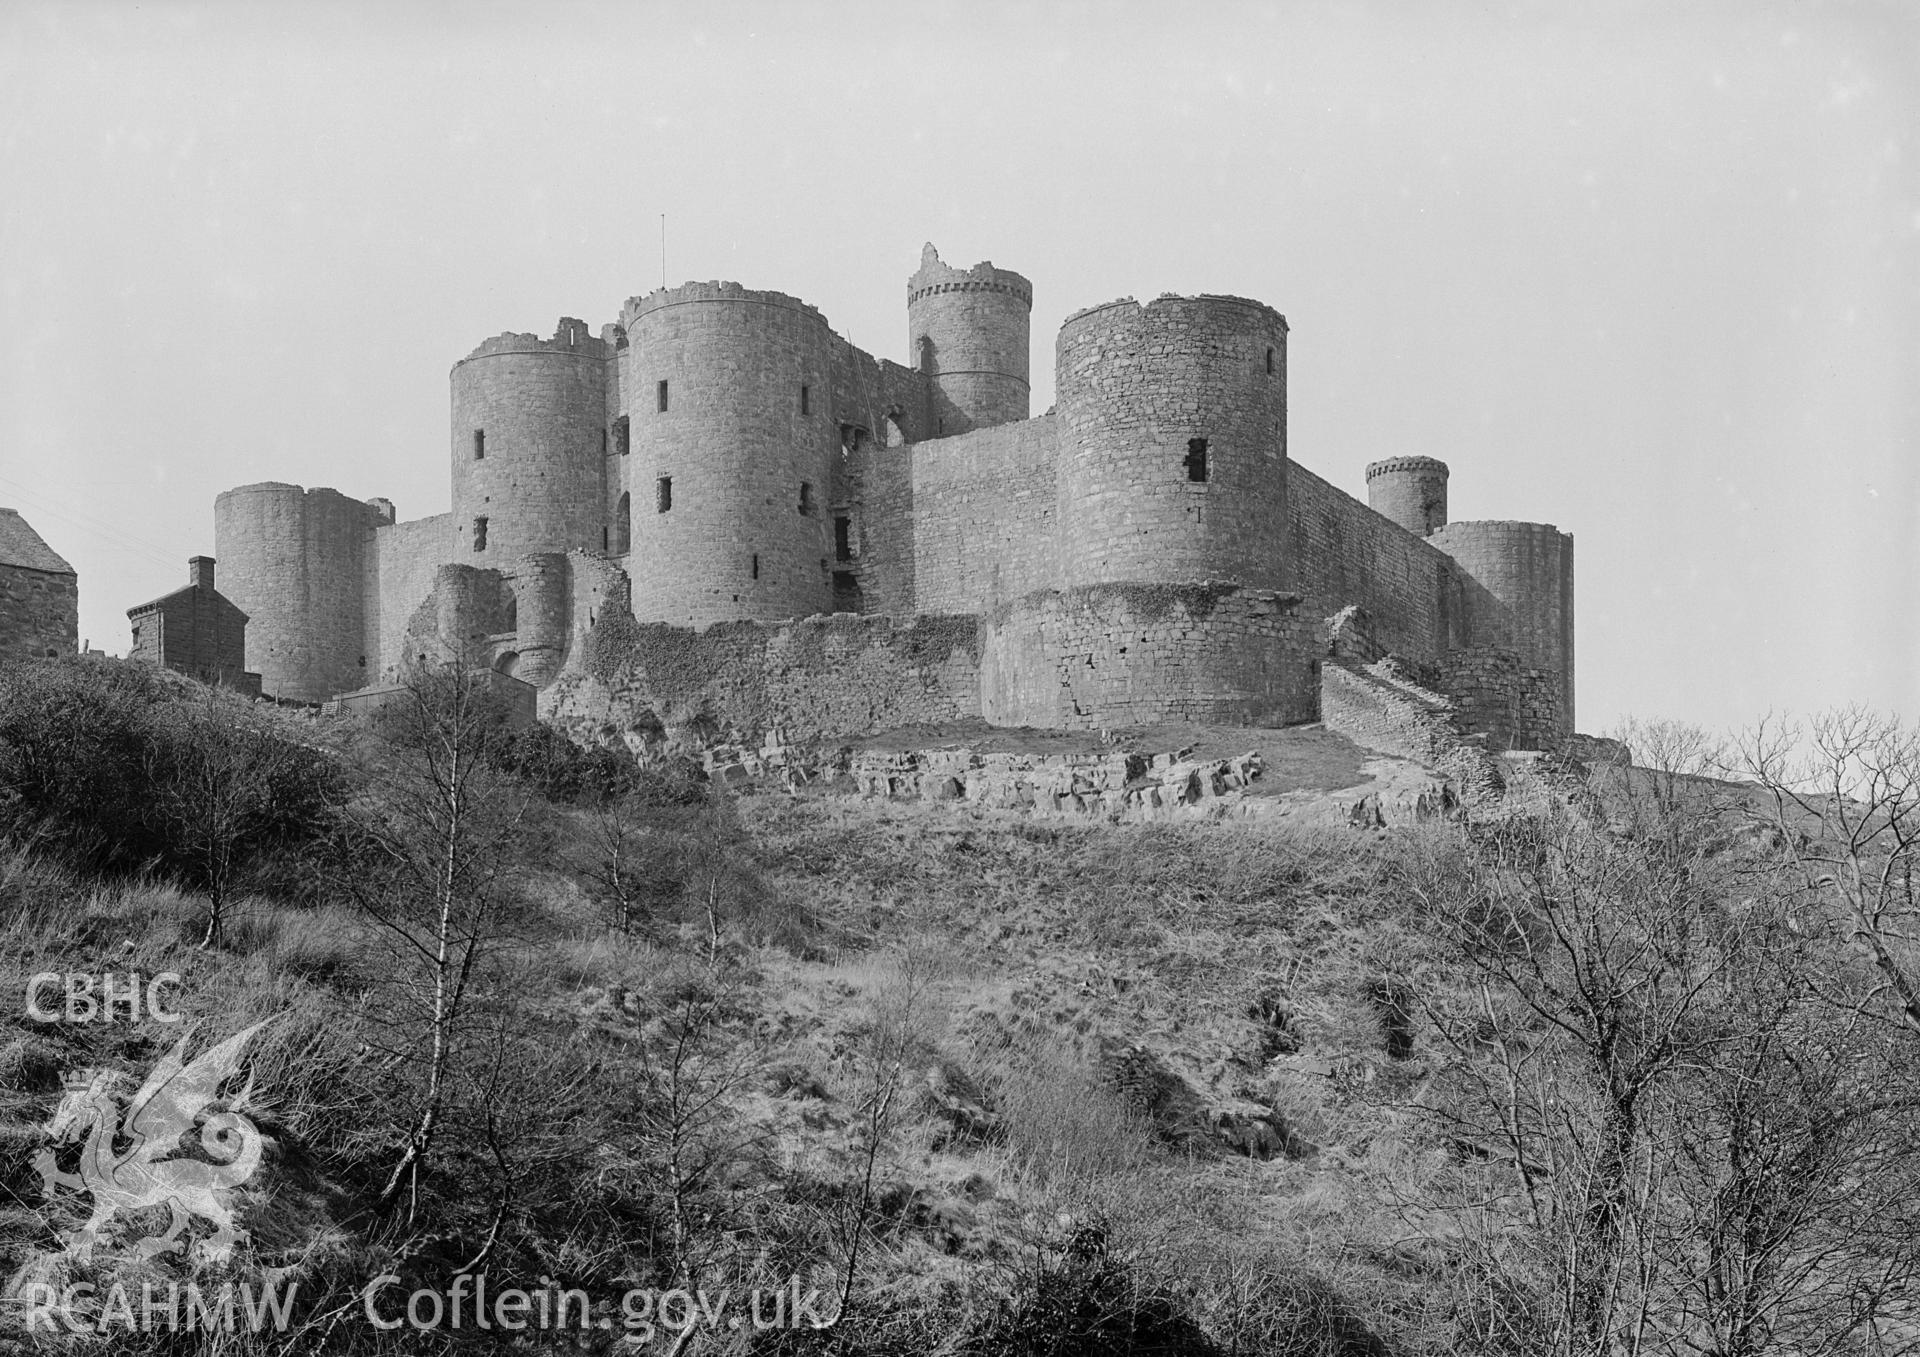 View of Harlech Castle from the north east.